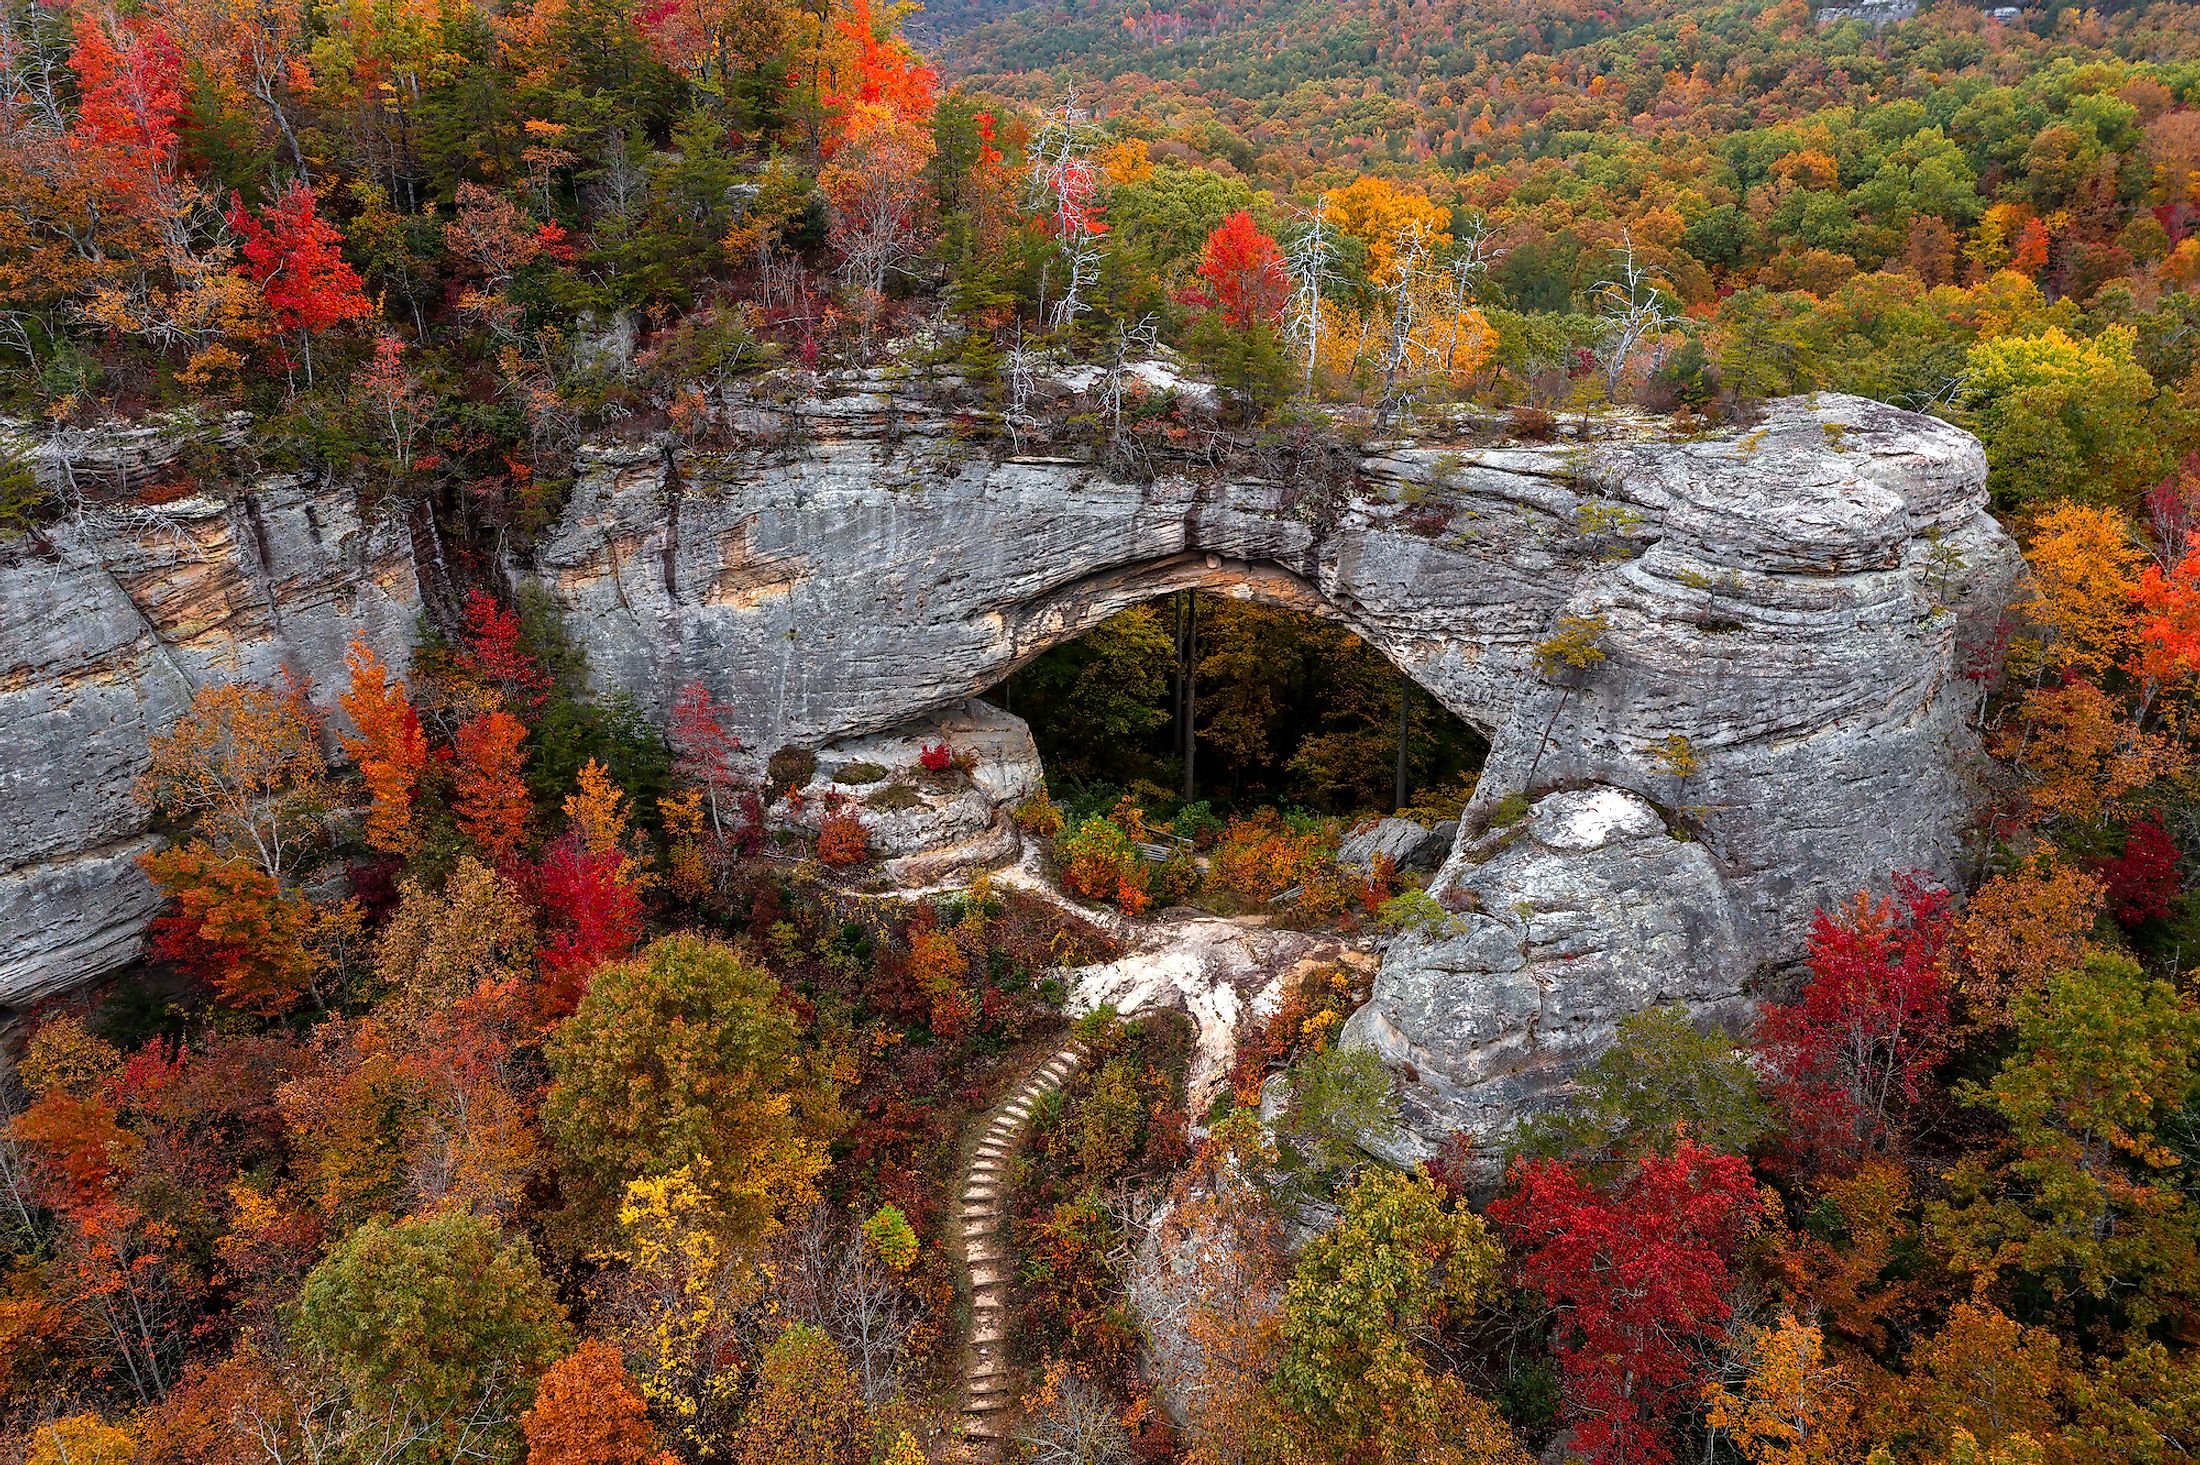 The Daniel Boone National Forest bursts with a riot of fall colors.